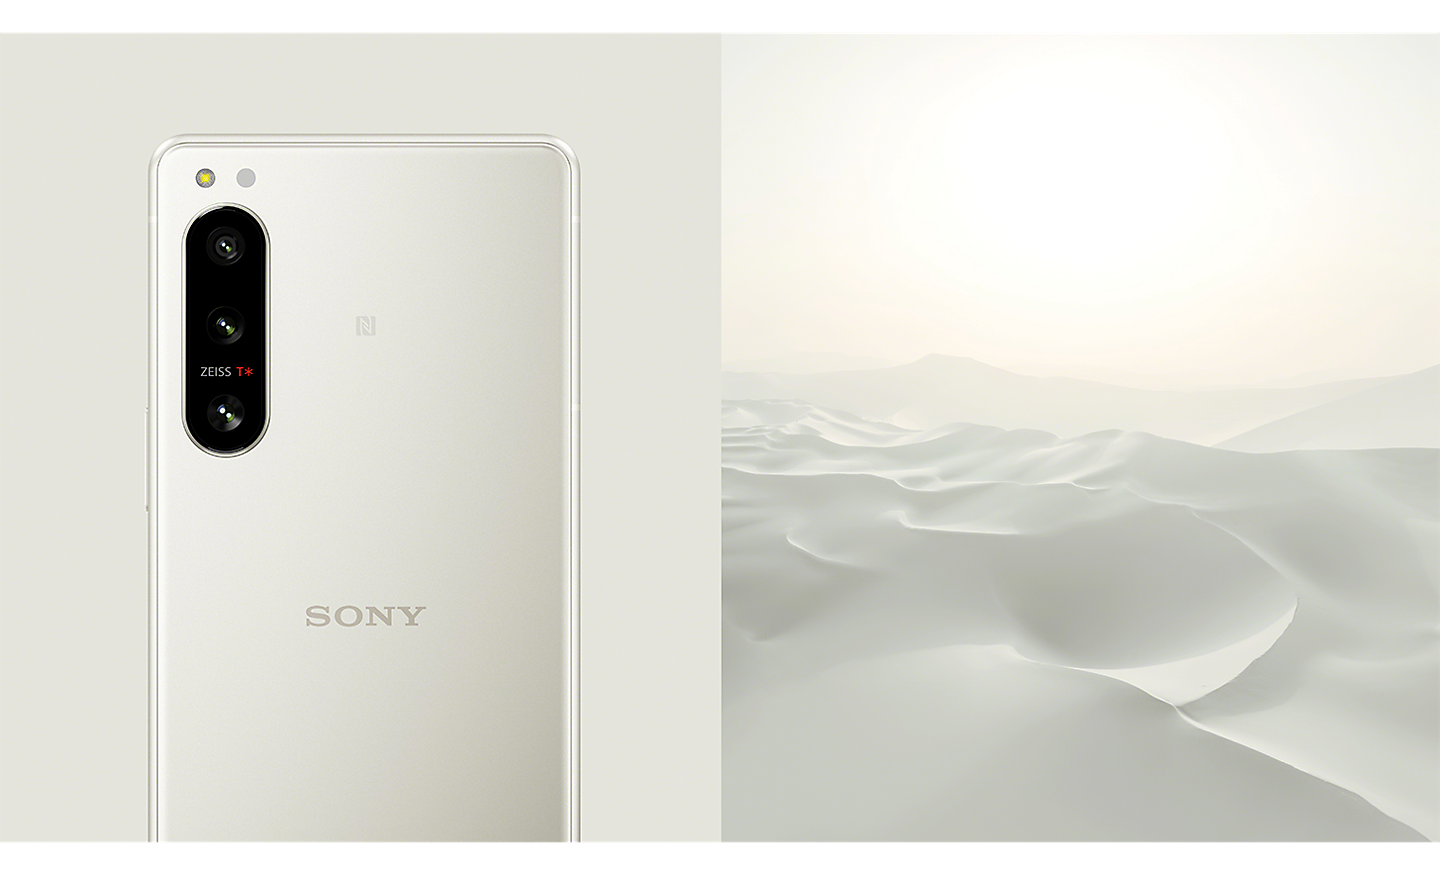 An Xperia 5 IV in Ecru White next to an image of sand dunes in glaring sunshine